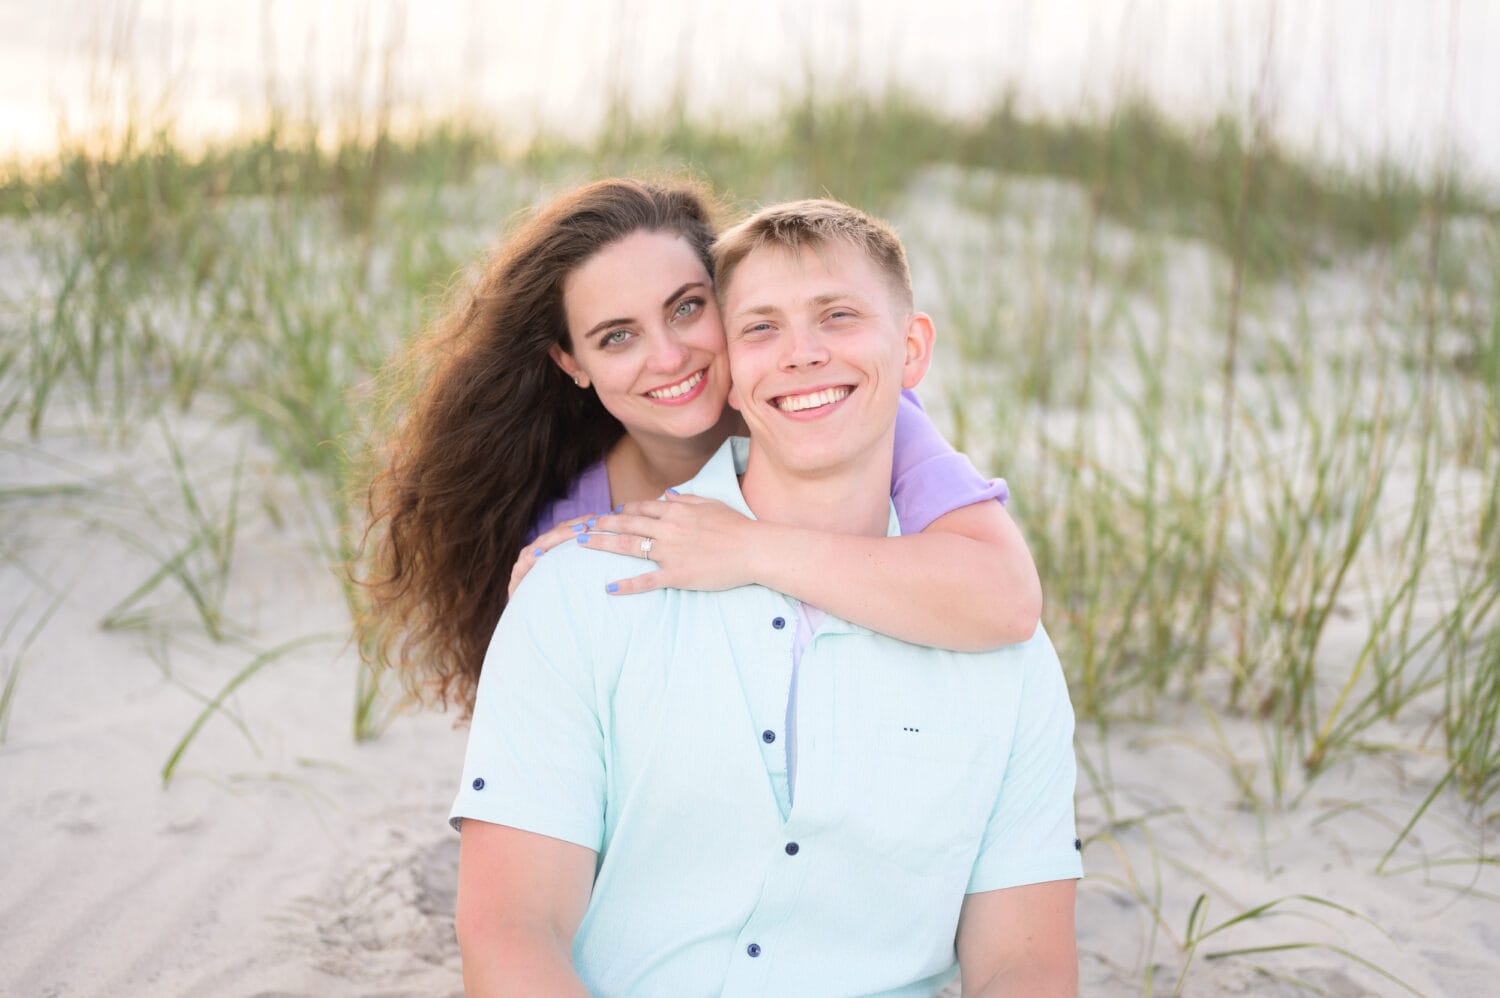 Giving a hug from behind by the dunes - Huntington Beach State Park - Myrtle Beach